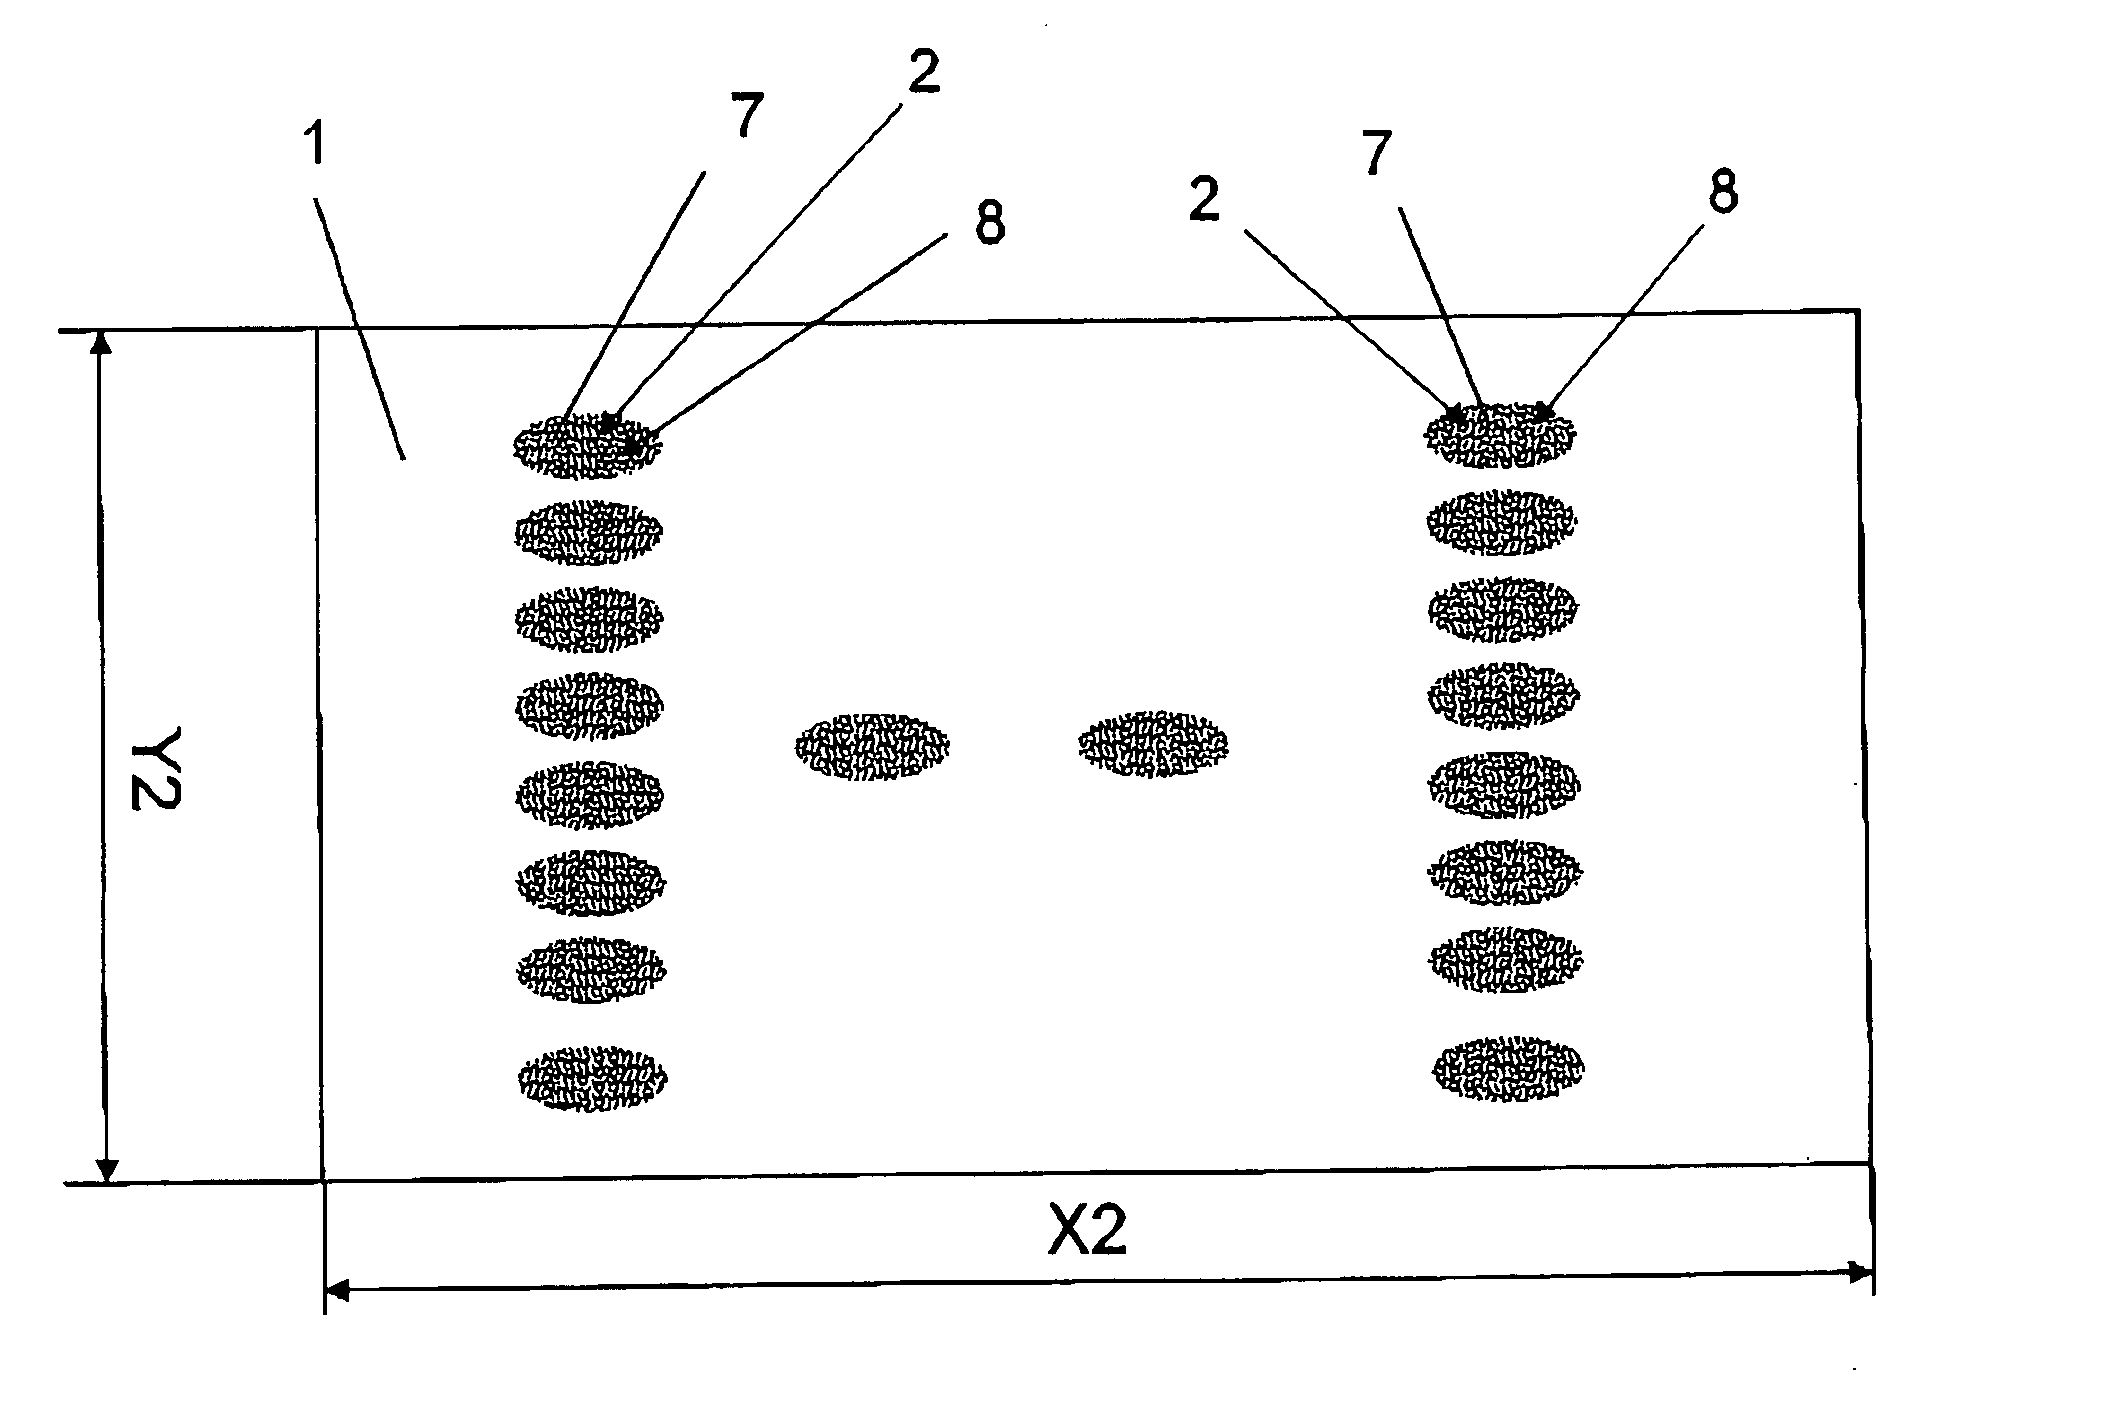 Patterned layer for absorbent article